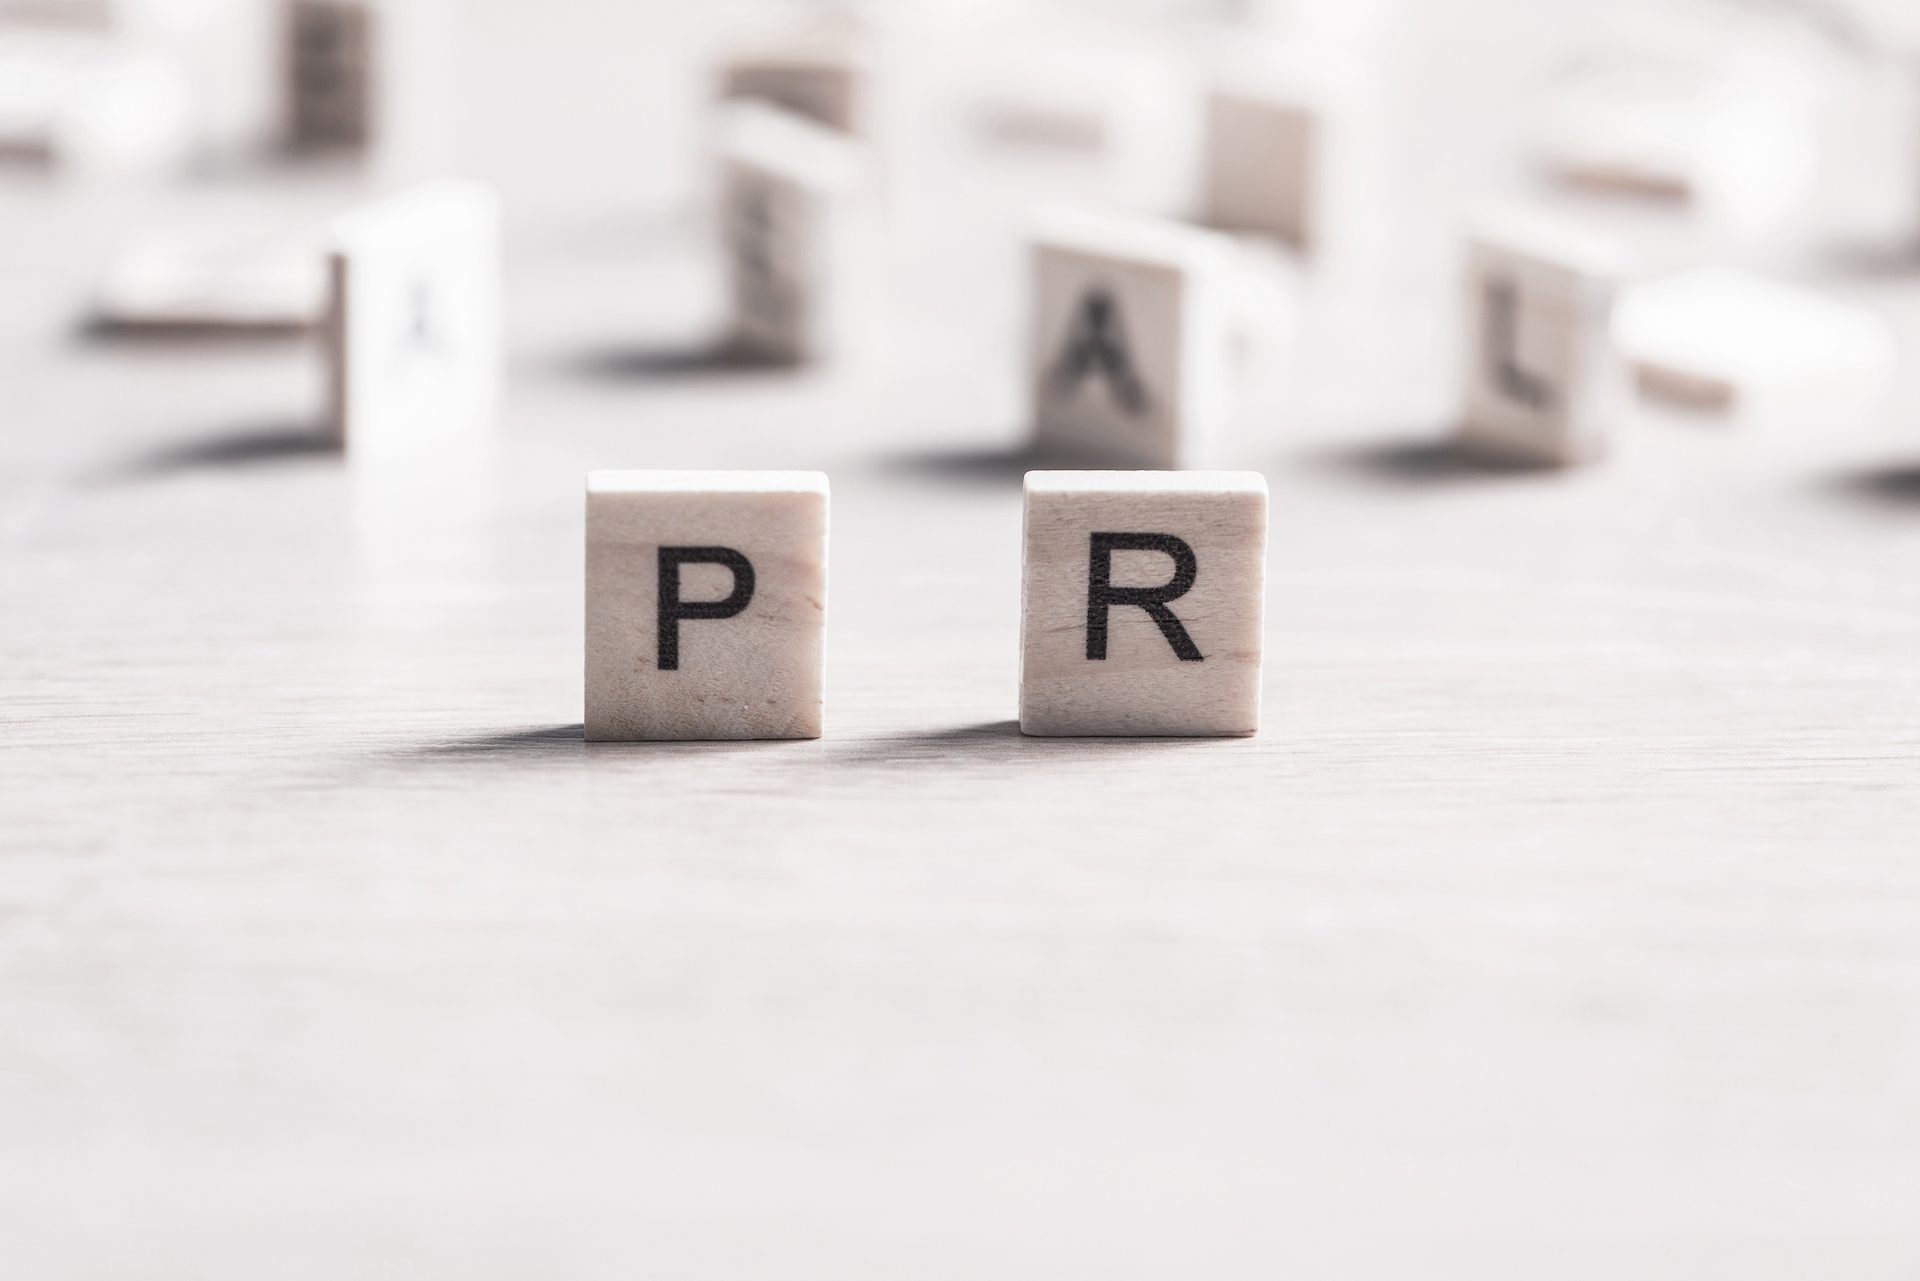 4 Things About Public Relations That Might Surprise You